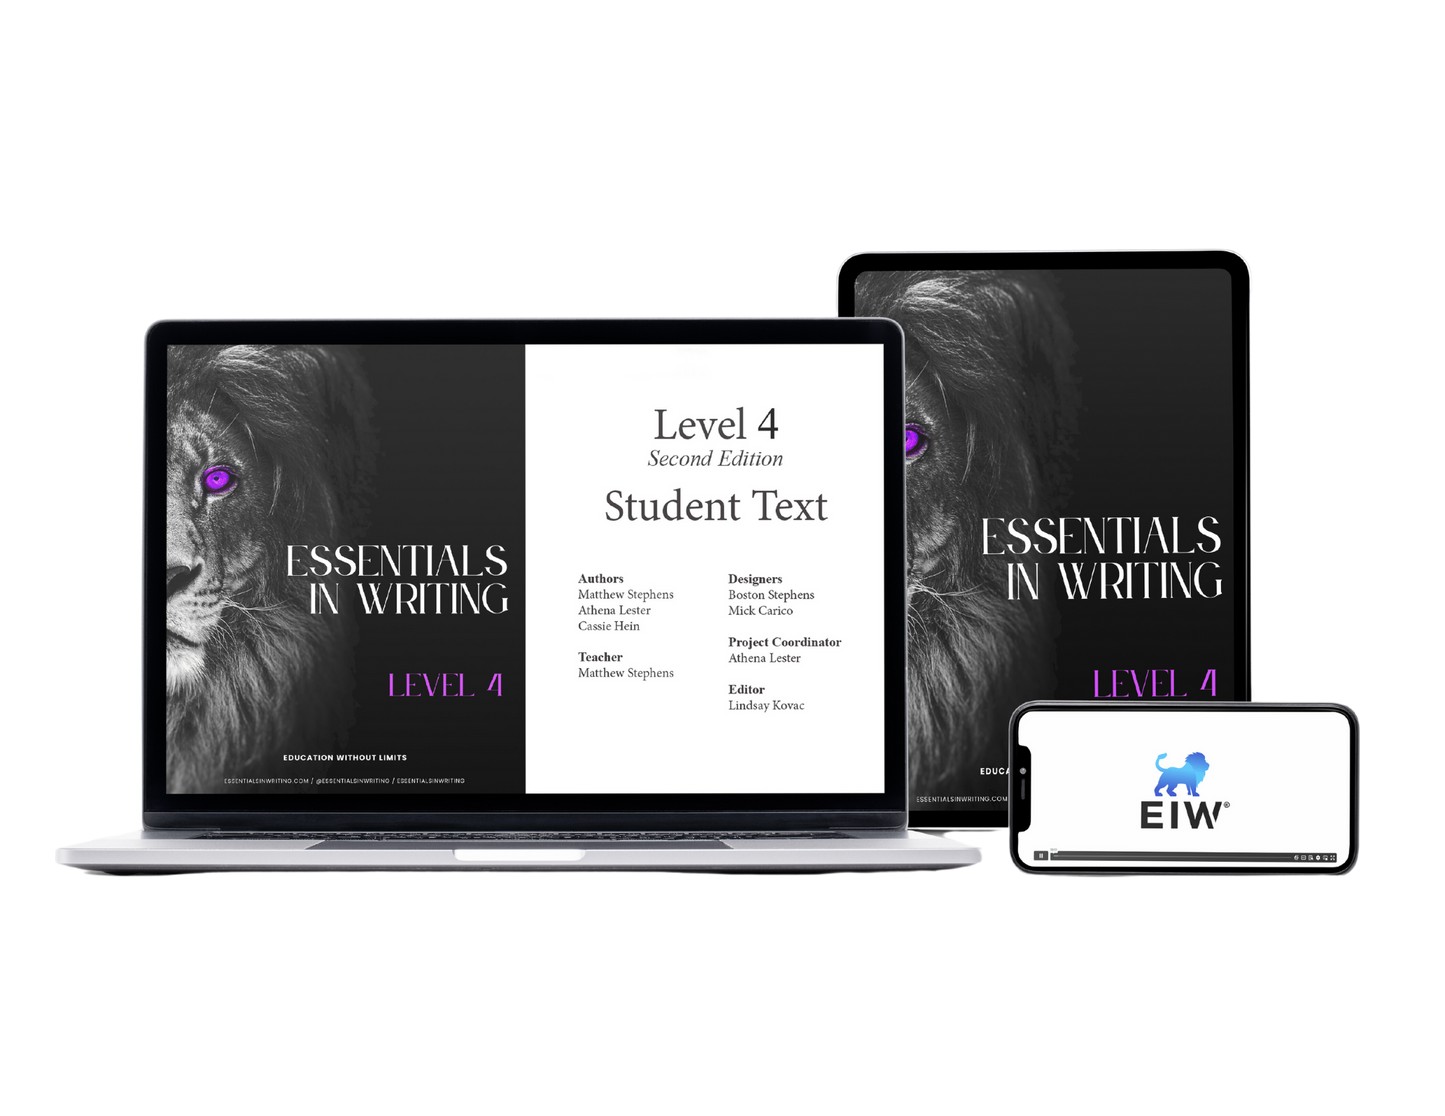 Essentials in Writing Level 4 Second Edition